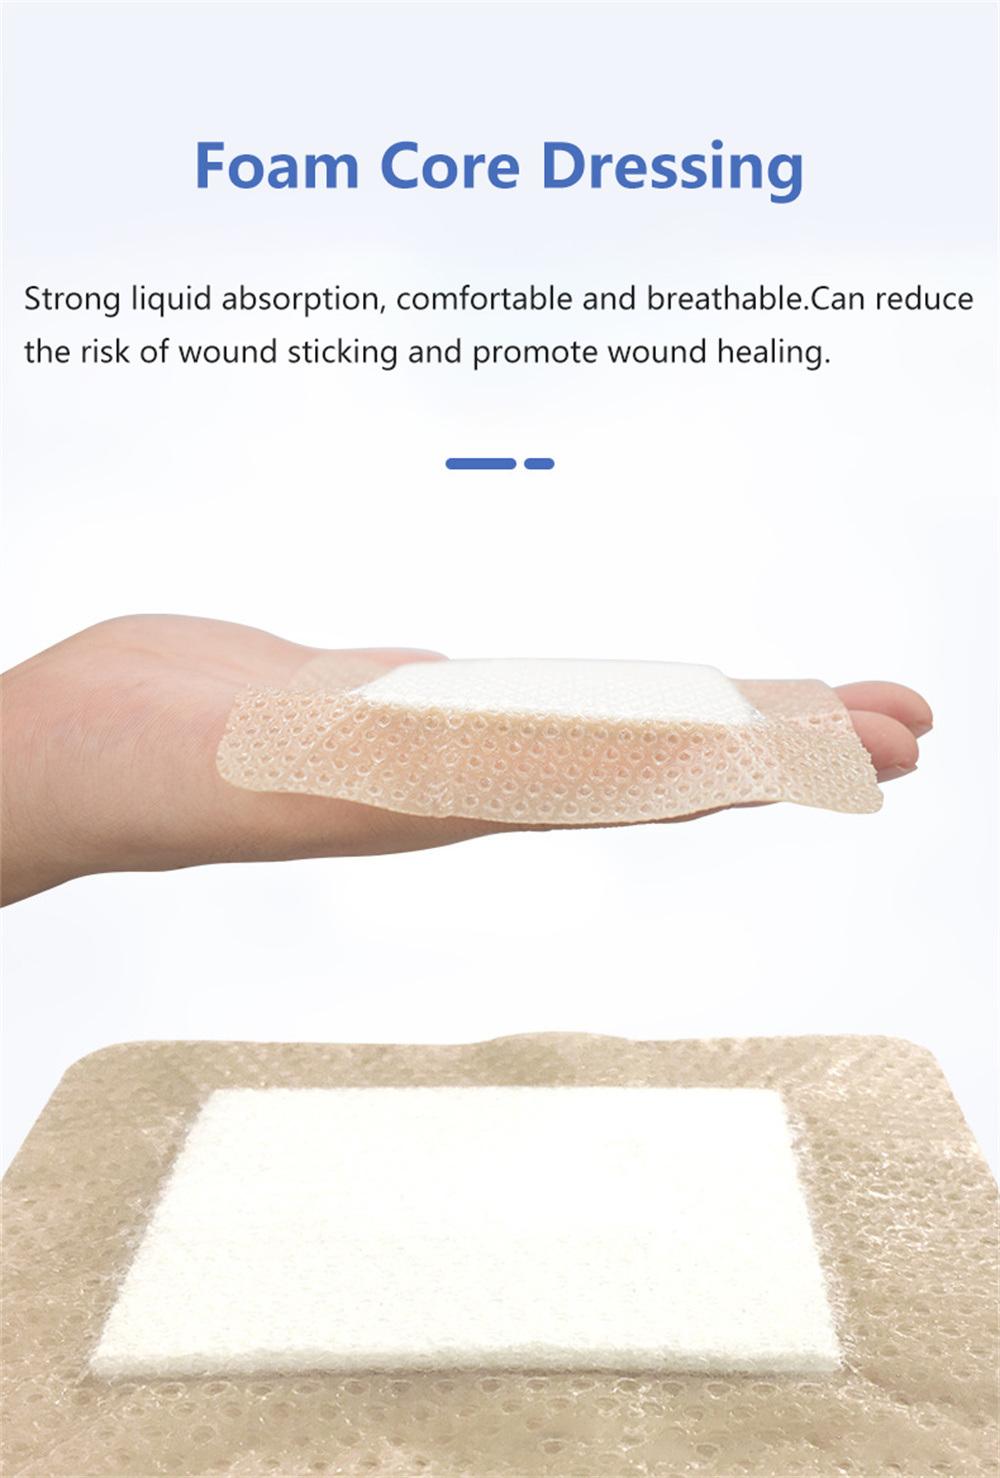 Self-Adherent Soft Silicone Foam Dressing with Border Comfort Foam Dressing Care